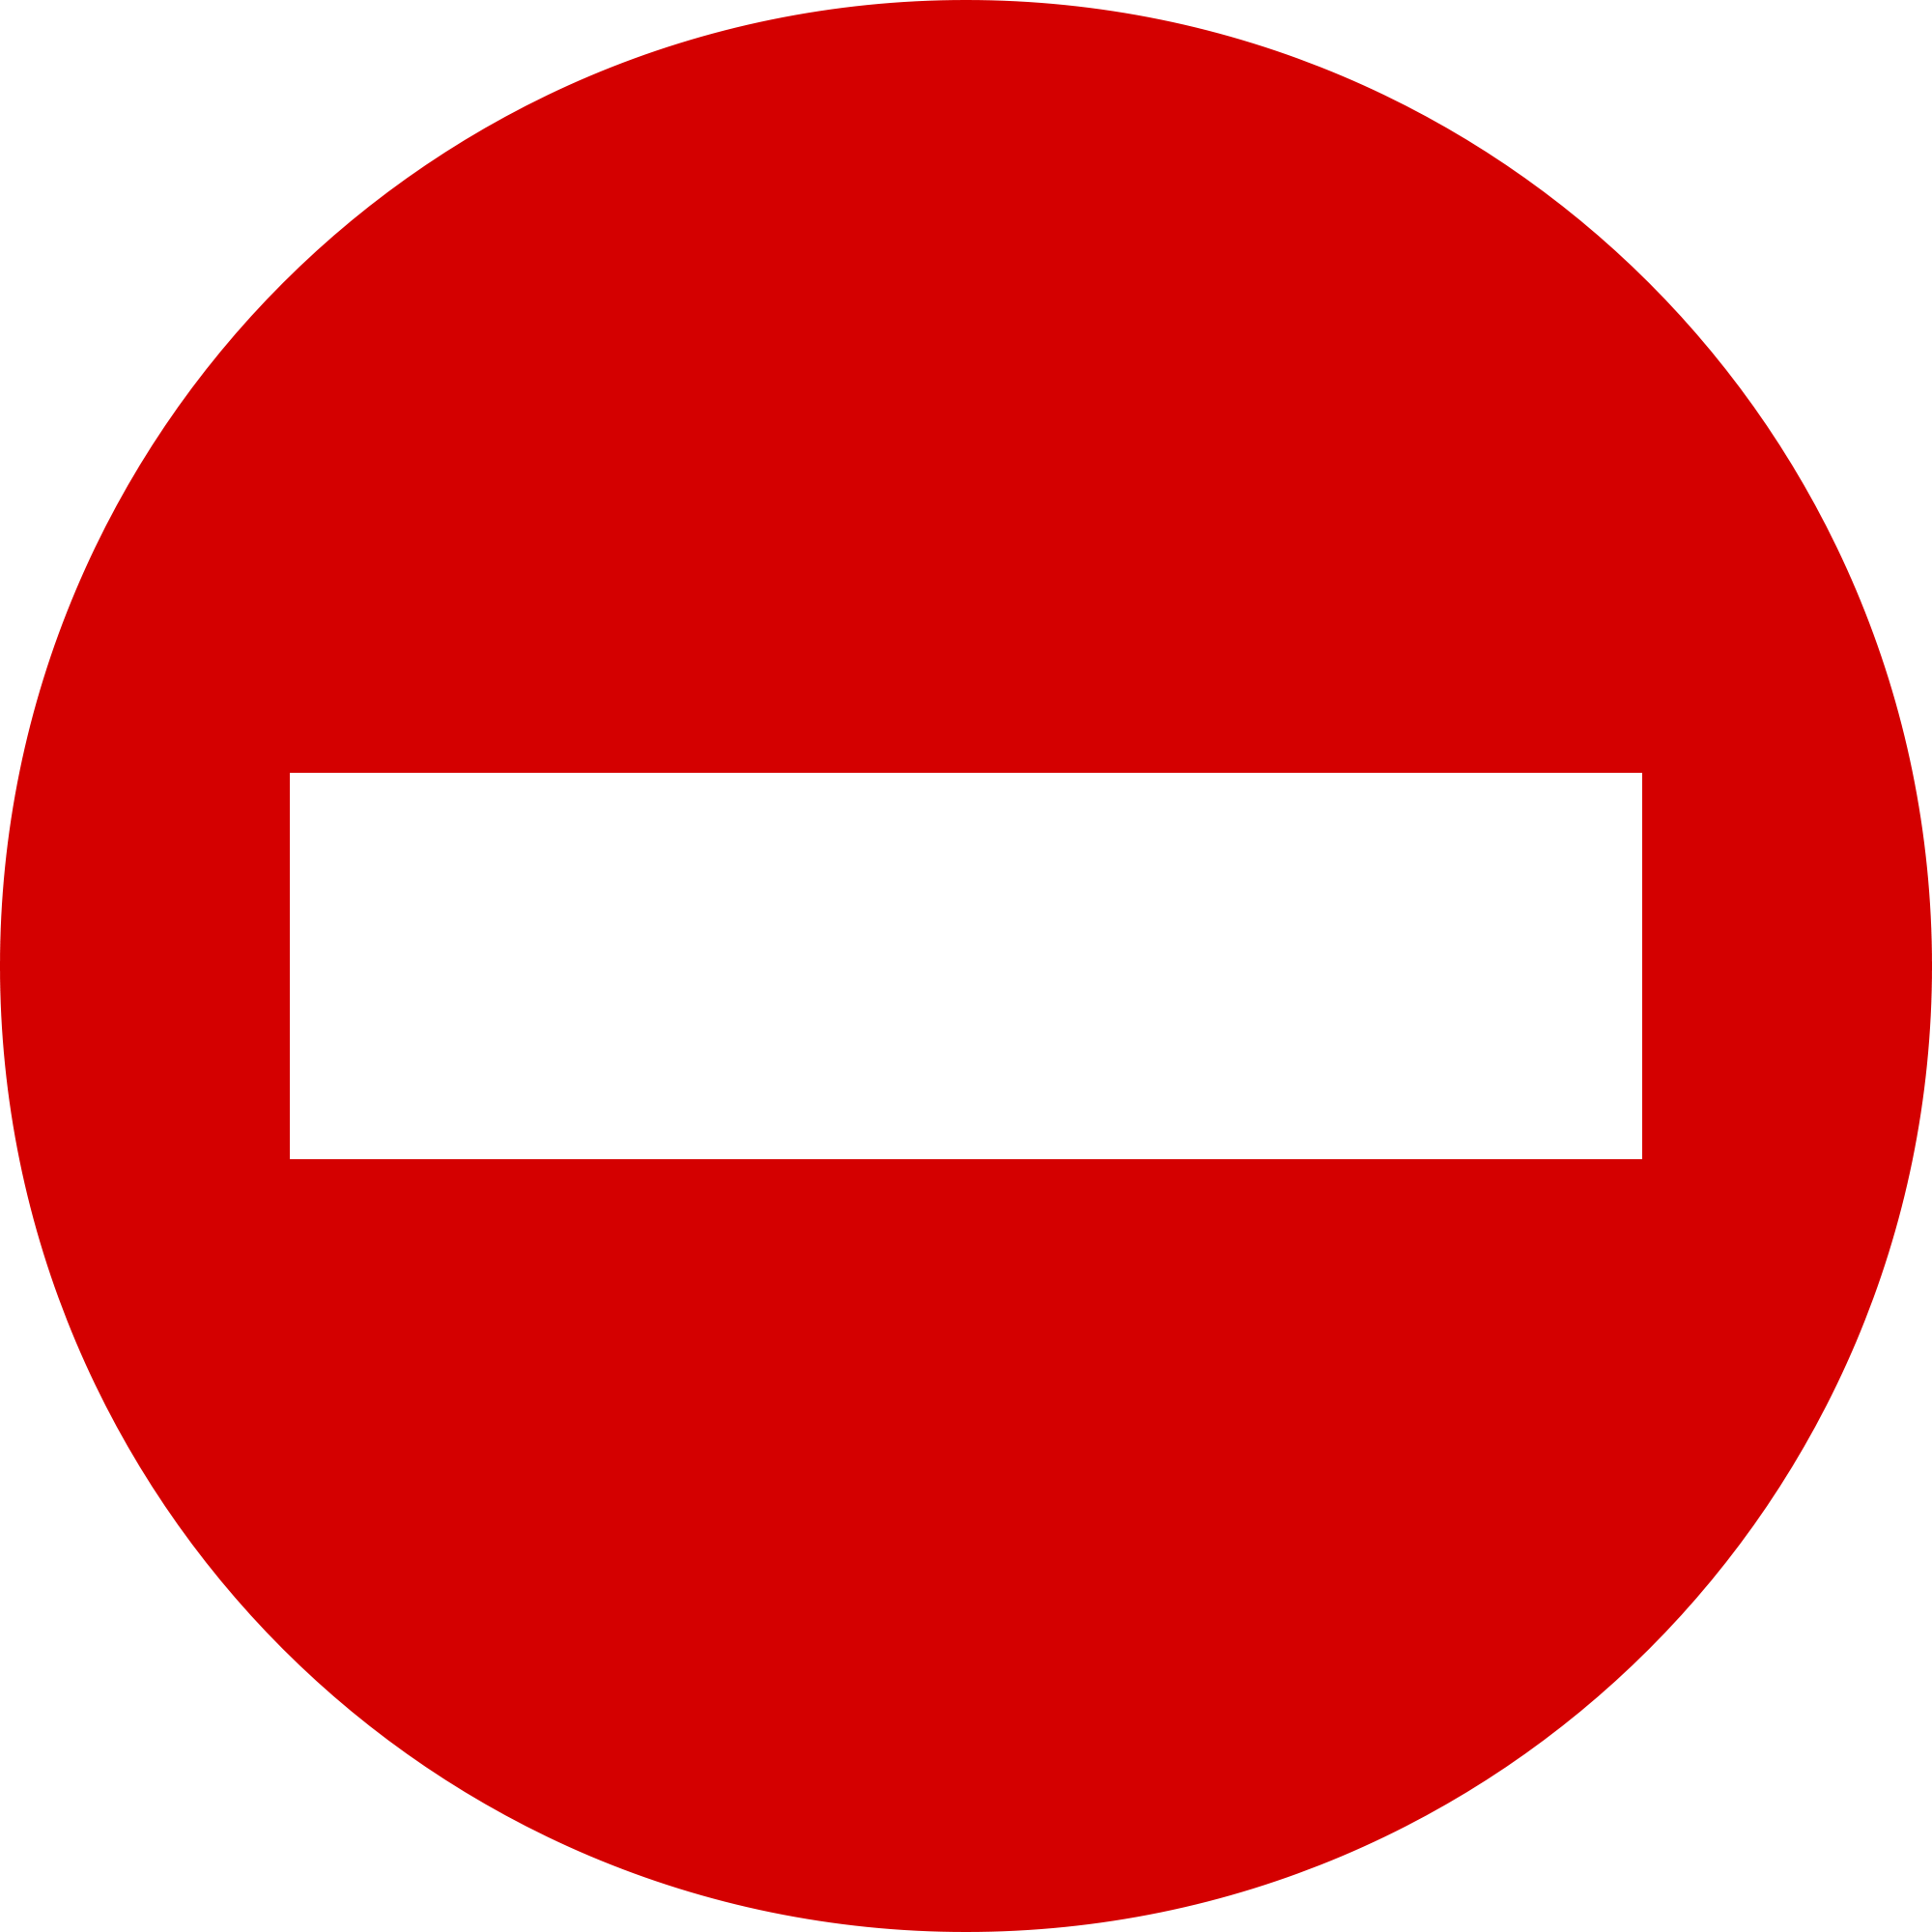 File:South Africa - Do Not Enter.svg - Wikimedia Commons